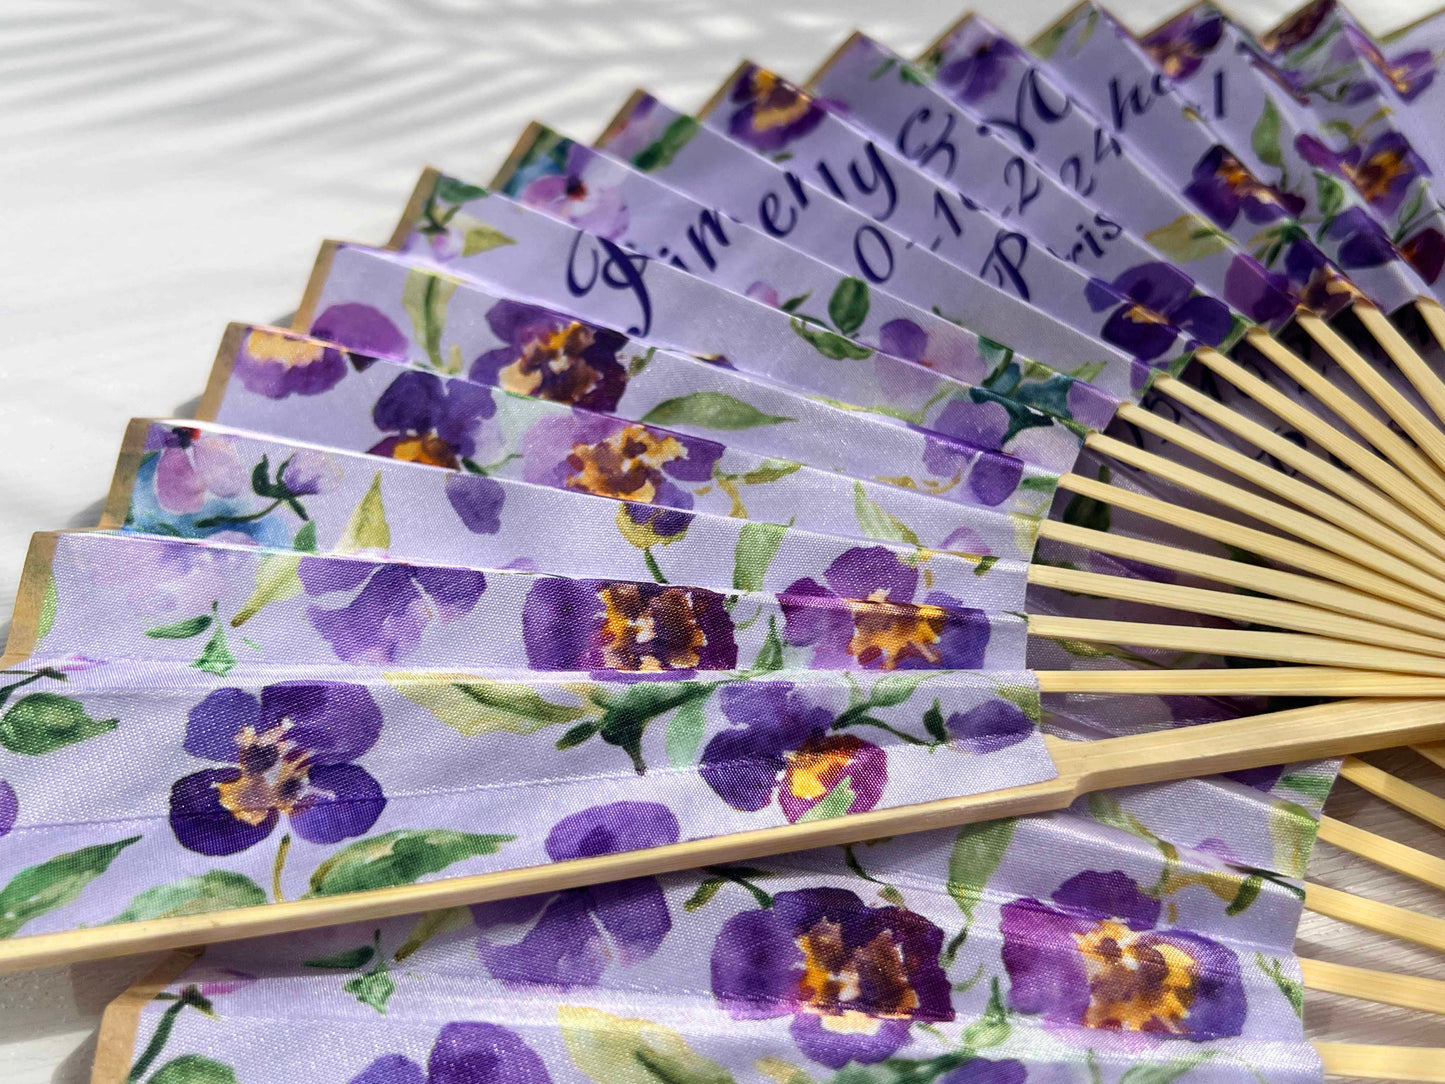 Personalized Custom Fabric Fans Rustic Wedding Party Favors Gifts Guests Bulk Hand Fans Folding Cloth Fans Concert Souvenirs Birthday Gifts